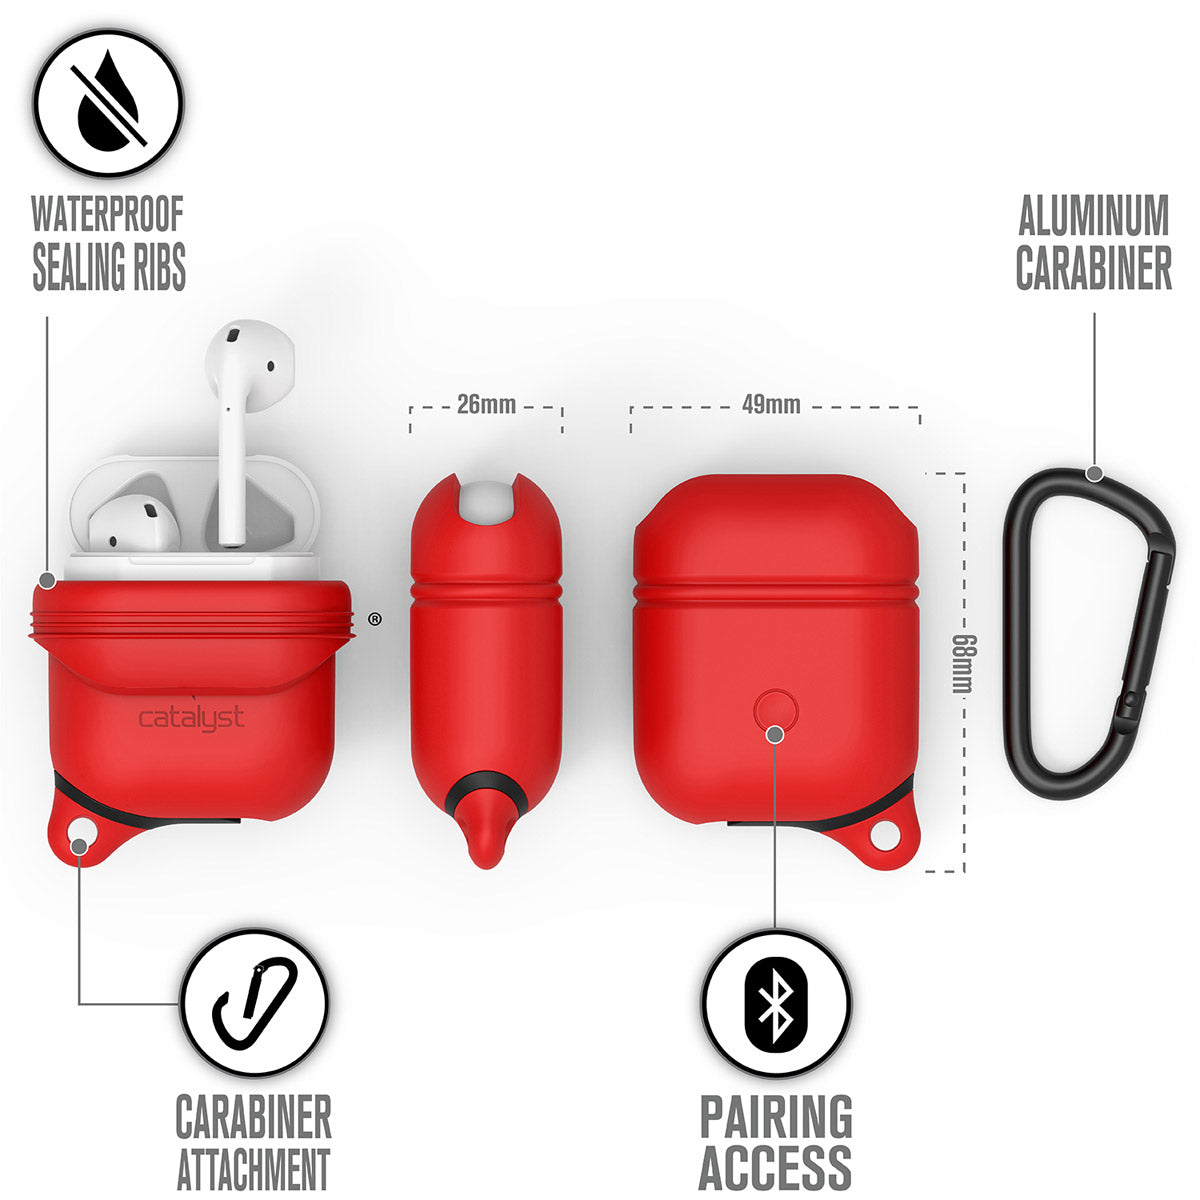 Catalyst airpods gen2/1 waterproof case + carabiner showing the case dimension and features in flame red text reads waterproof sealing ribs aluminum carabiner pairing access carabiner attachment